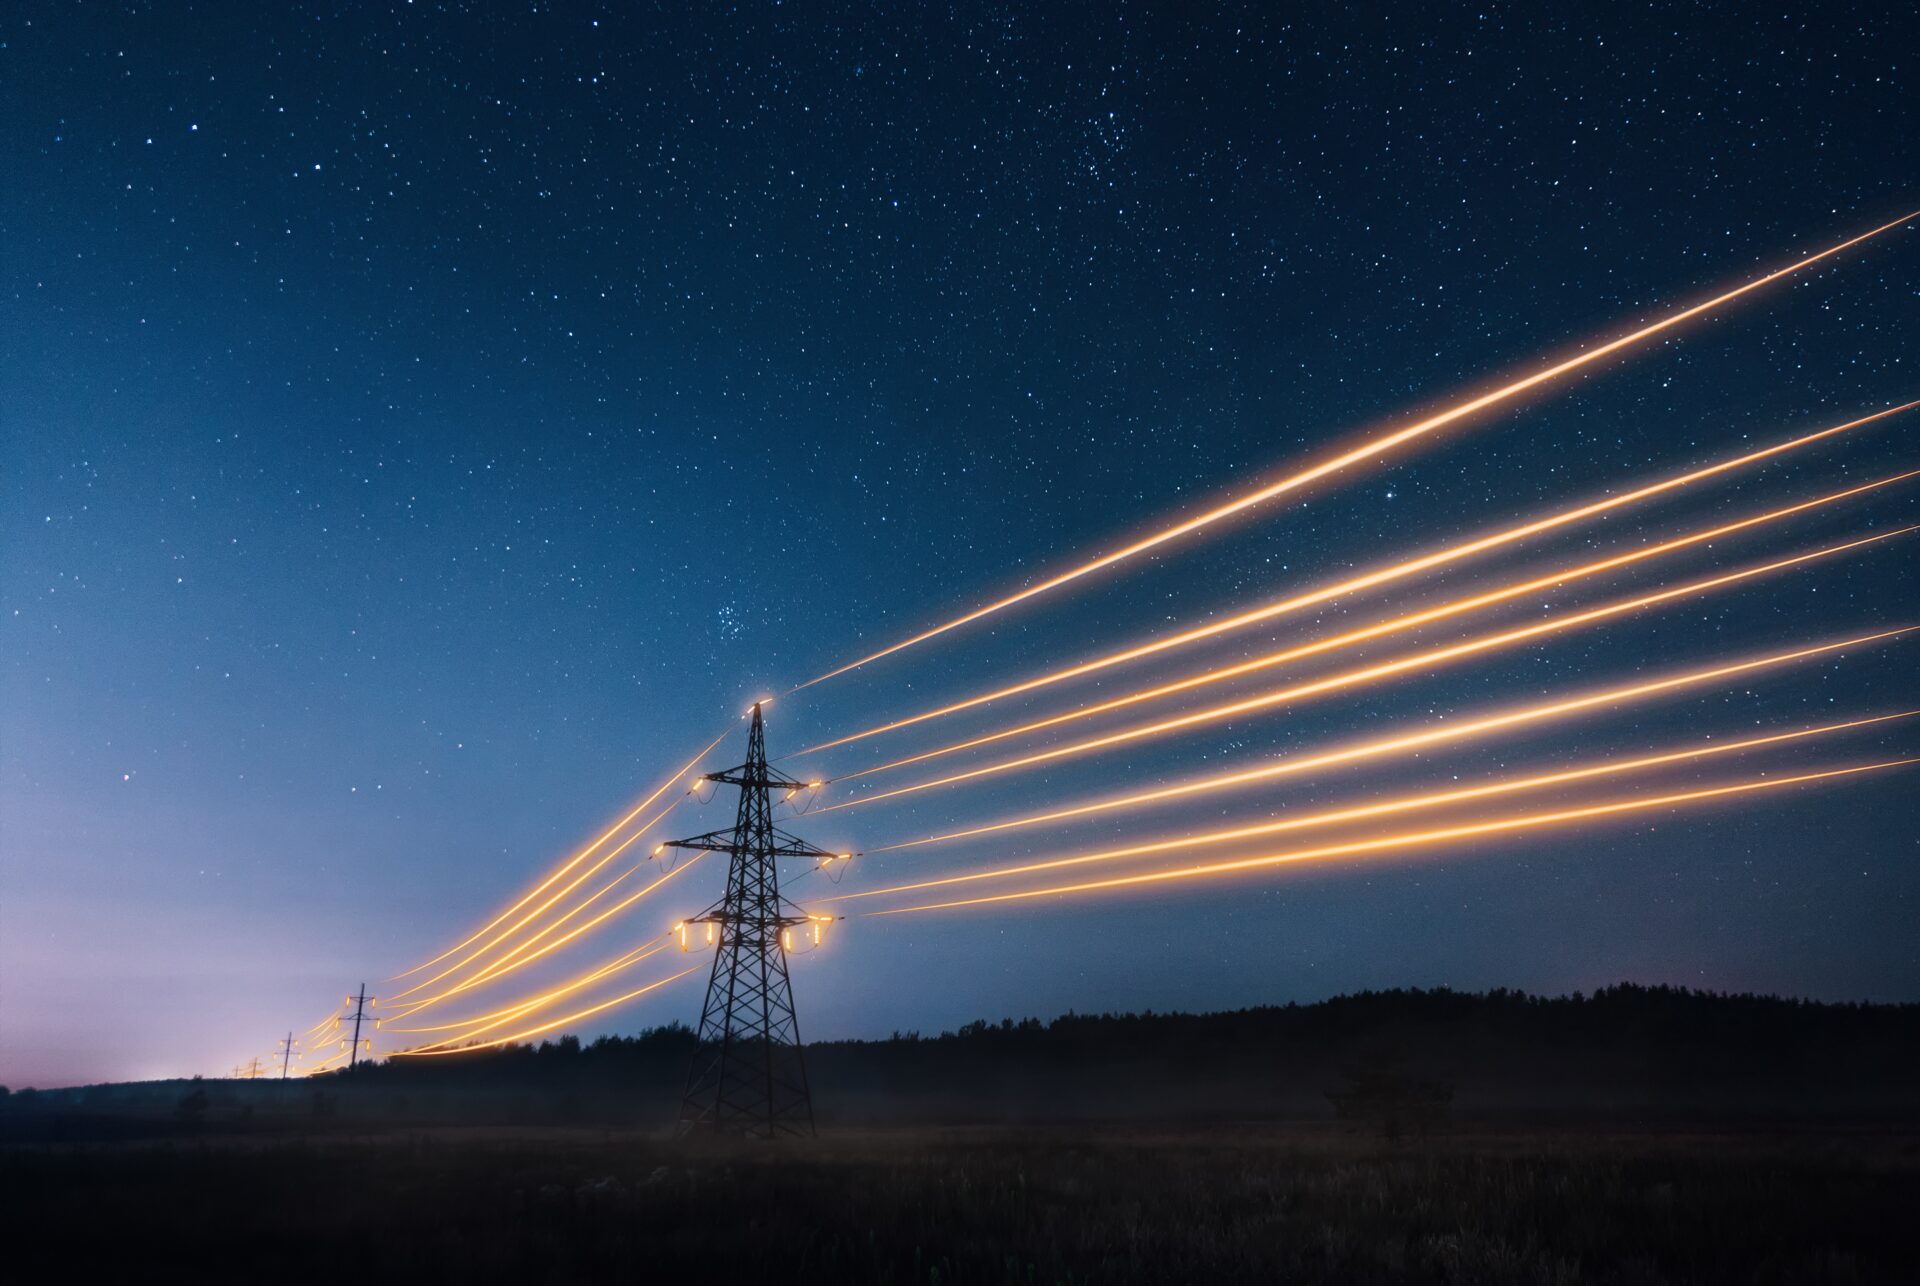 electricity transmission between towers with glowing wires against a nearly dark sky at dusk